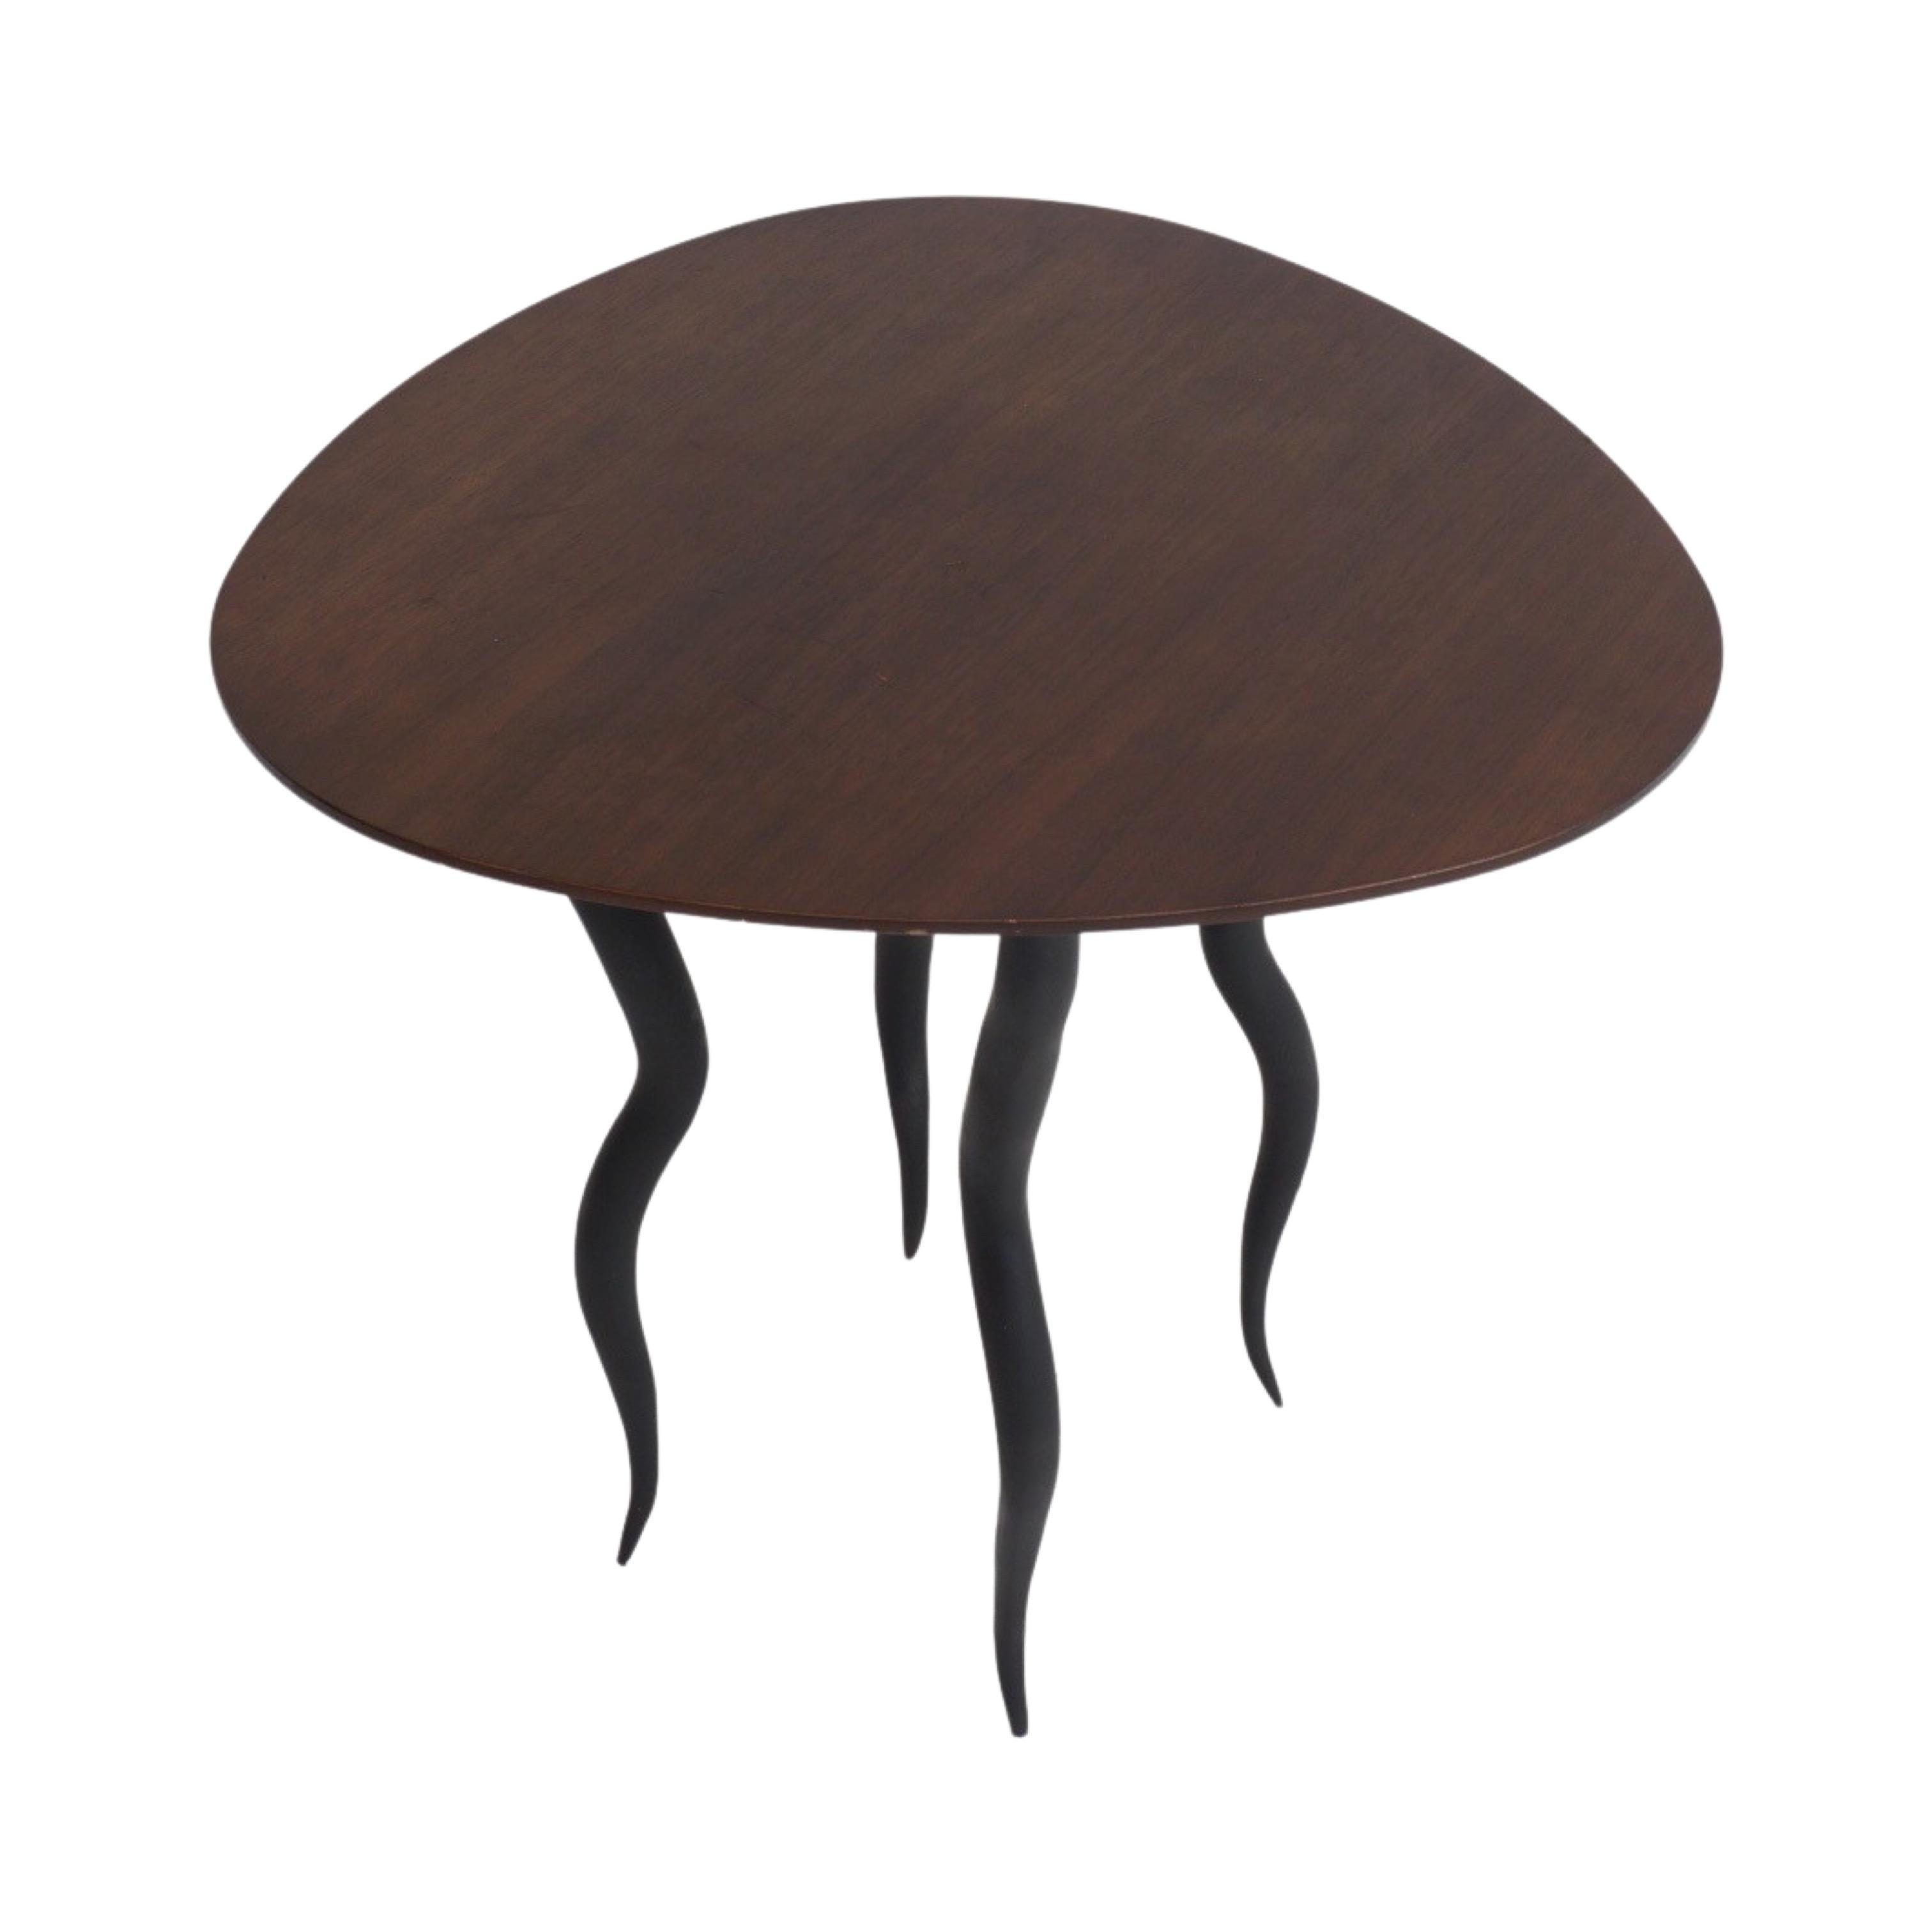 Have you ever seen Louise Bourgeois’s Spider sculptures? Well, this wavy leg table is basically one of those legendary pieces of art reincarnated in table form. This table has a lot of other things in common with spiders. Its design is clever yet